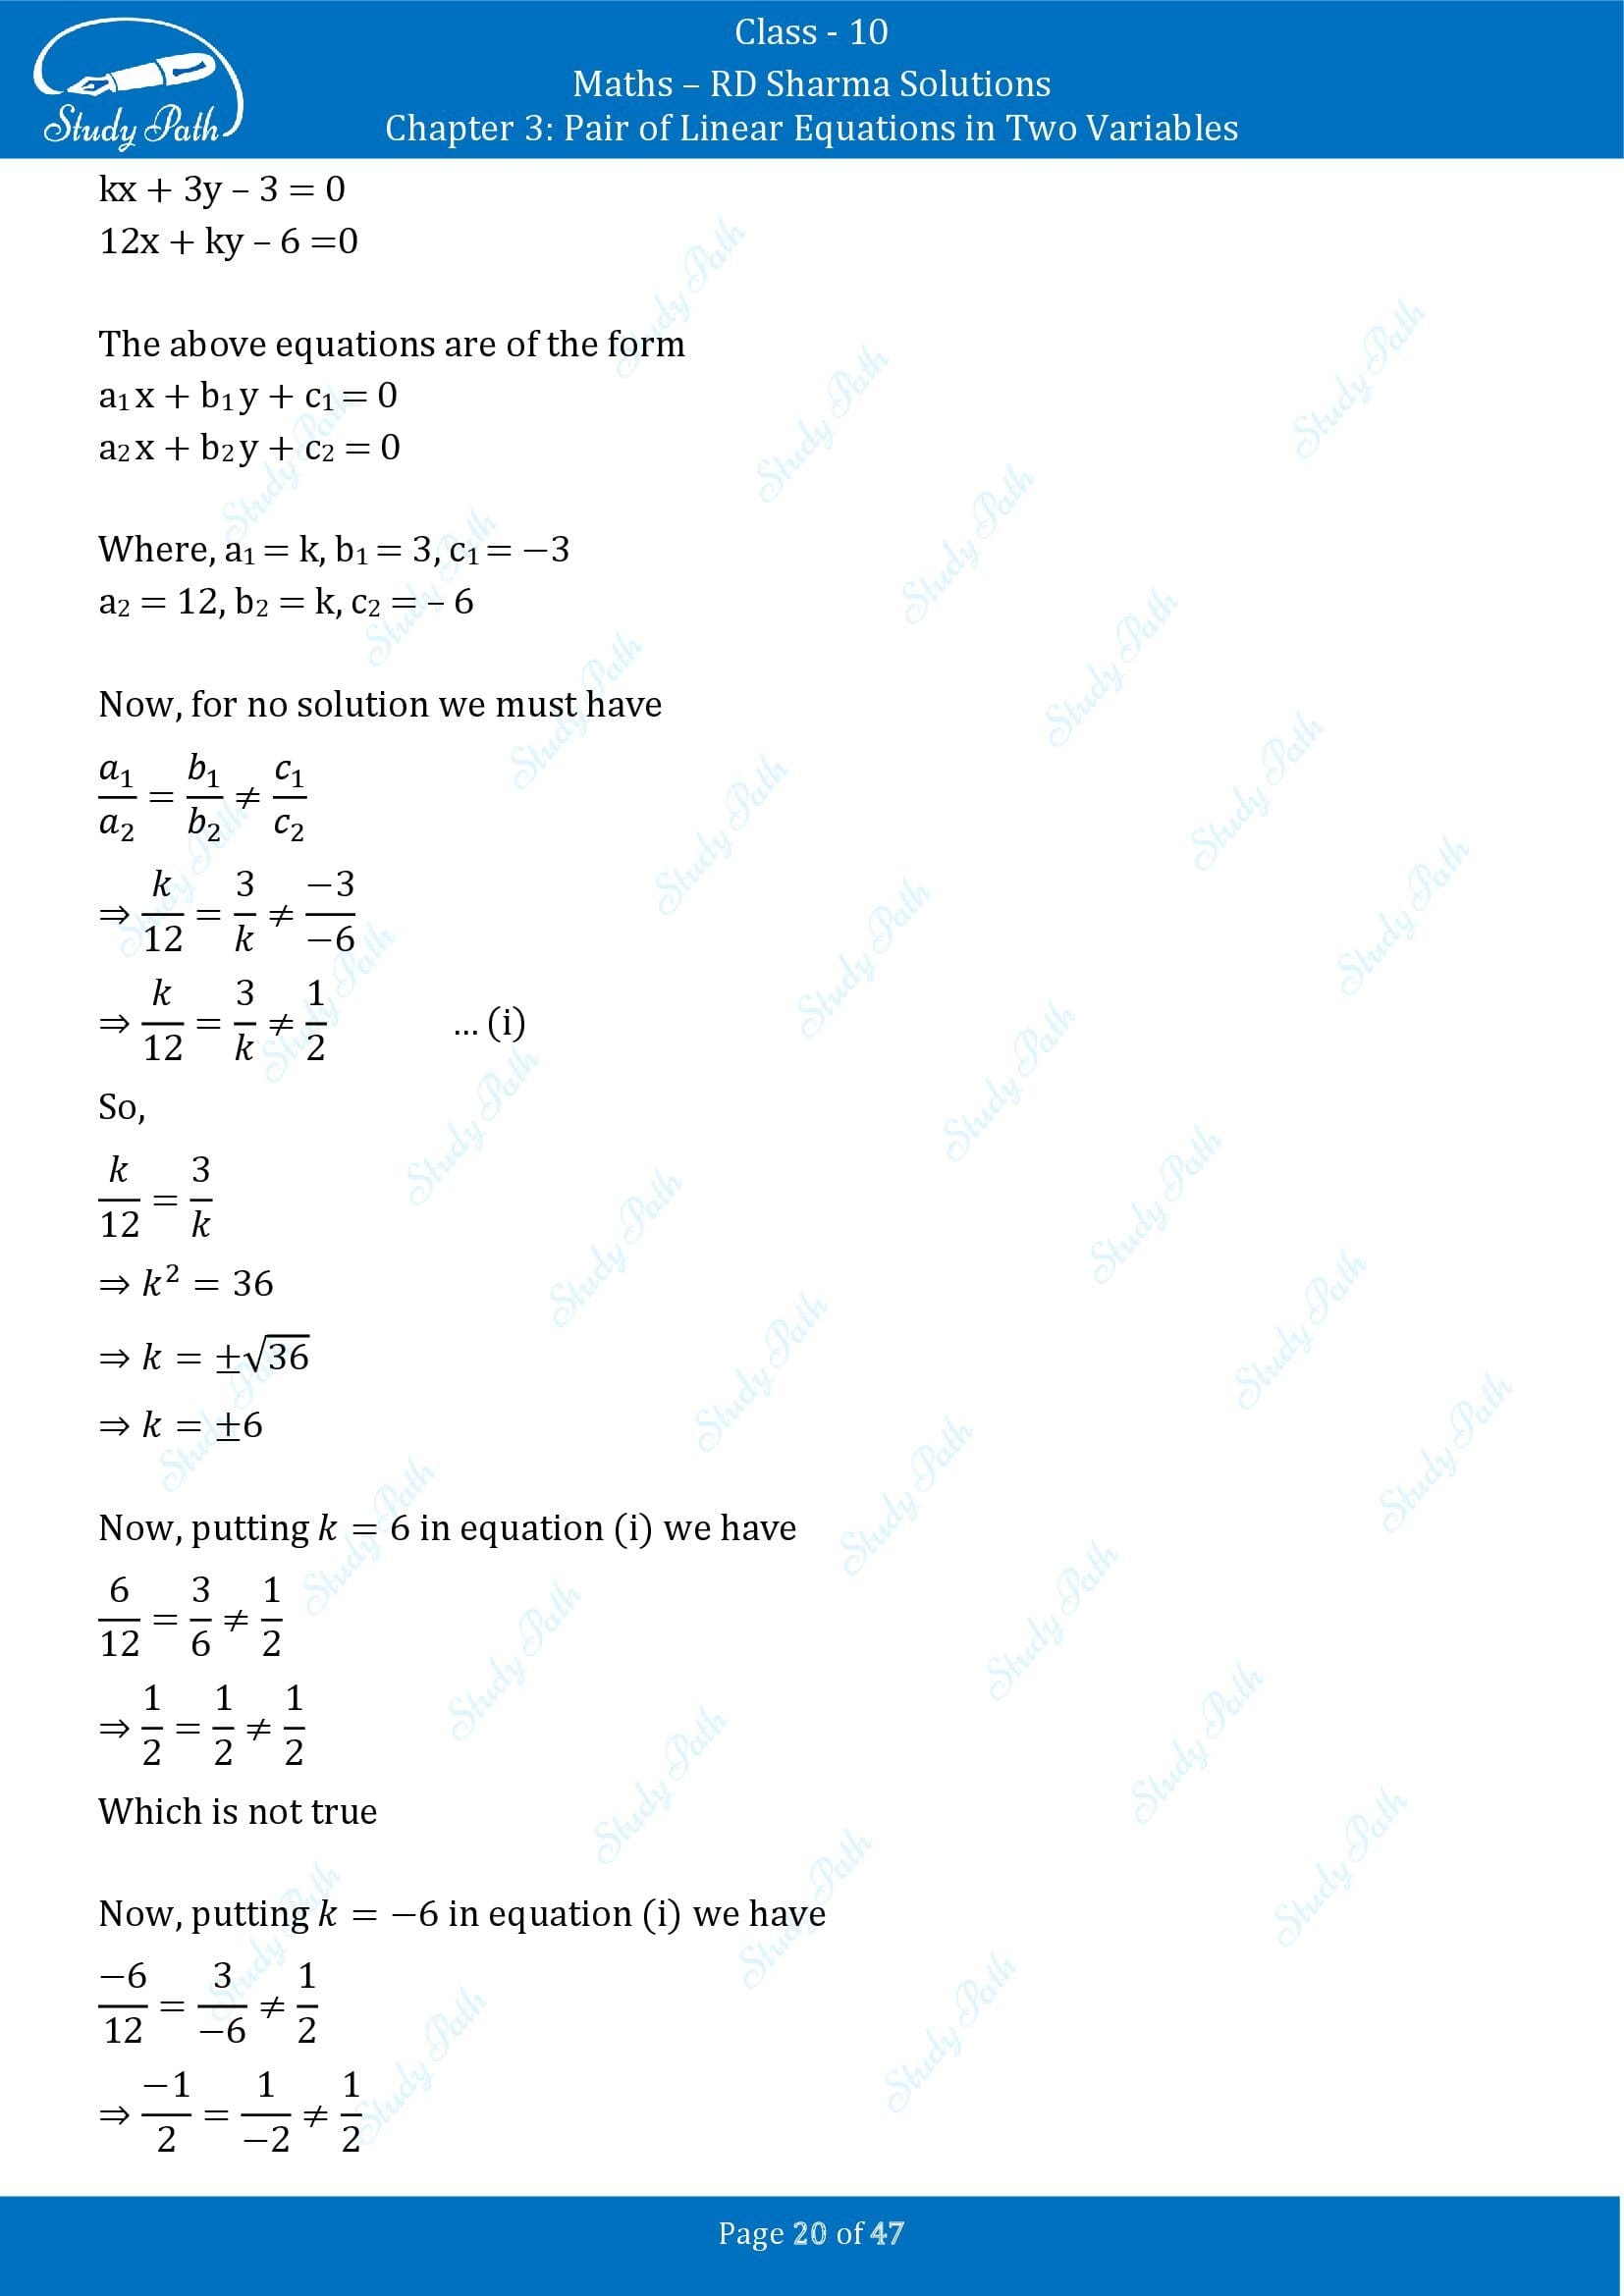 RD Sharma Solutions Class 10 Chapter 3 Pair of Linear Equations in Two Variables Exercise 3.5 00020